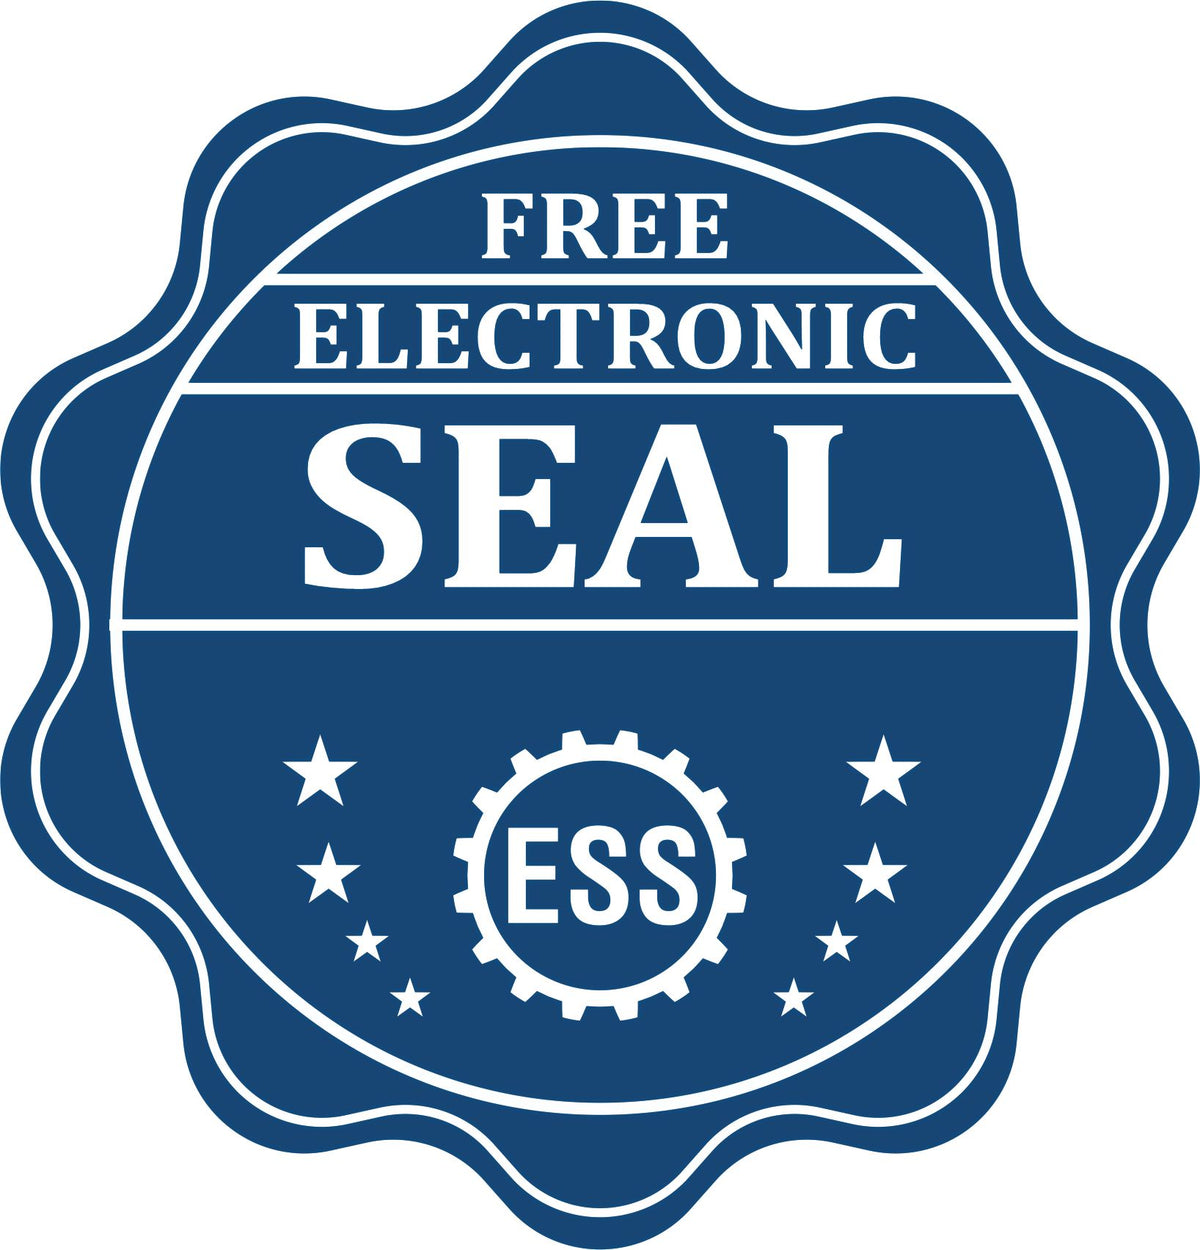 A badge showing a free electronic seal for the Soft Pocket Connecticut Landscape Architect Embosser with stars and the ESS gear on the emblem.